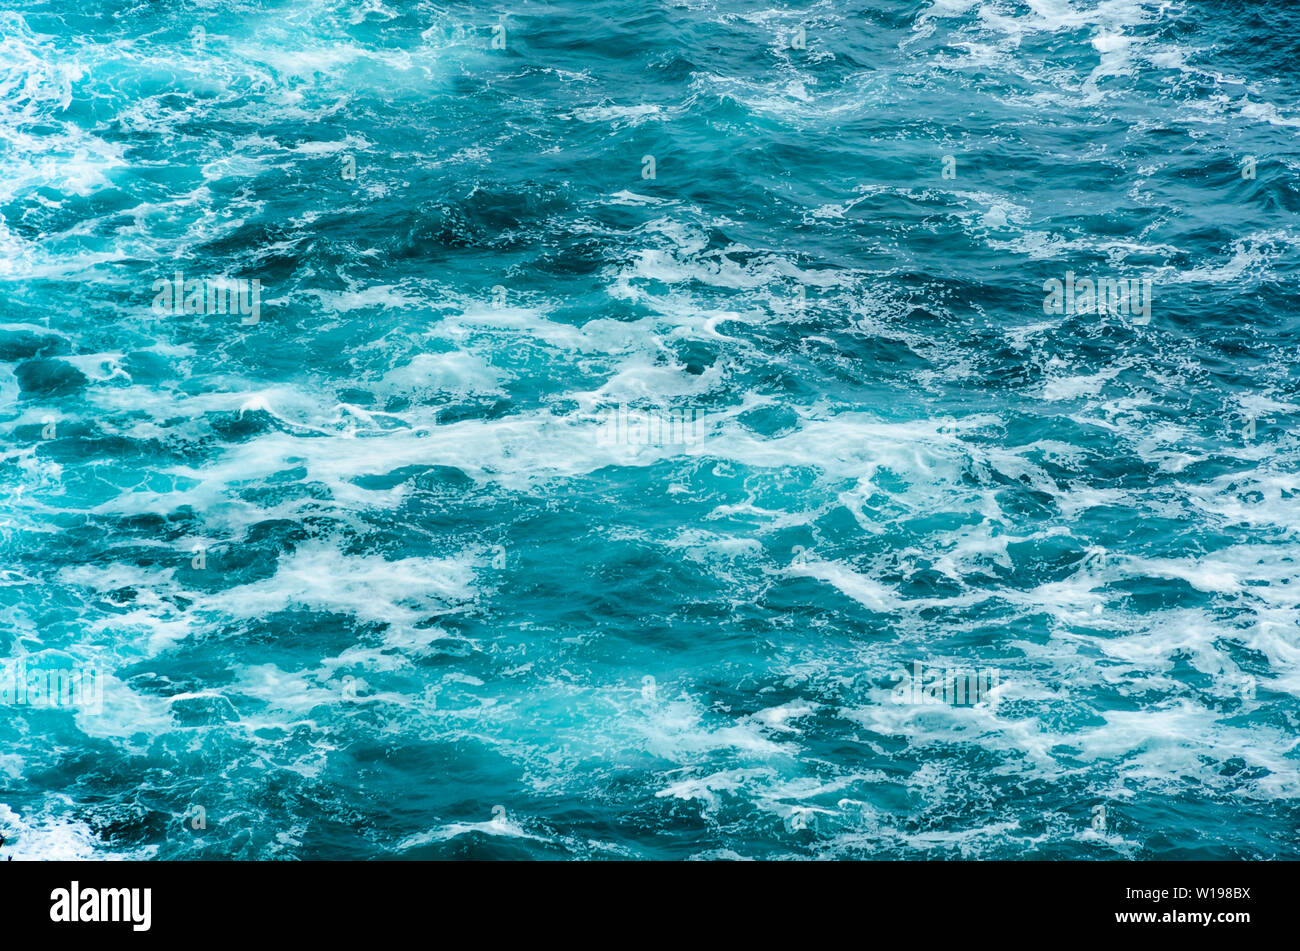 Blue sea water surface rippled with foam Stock Photo